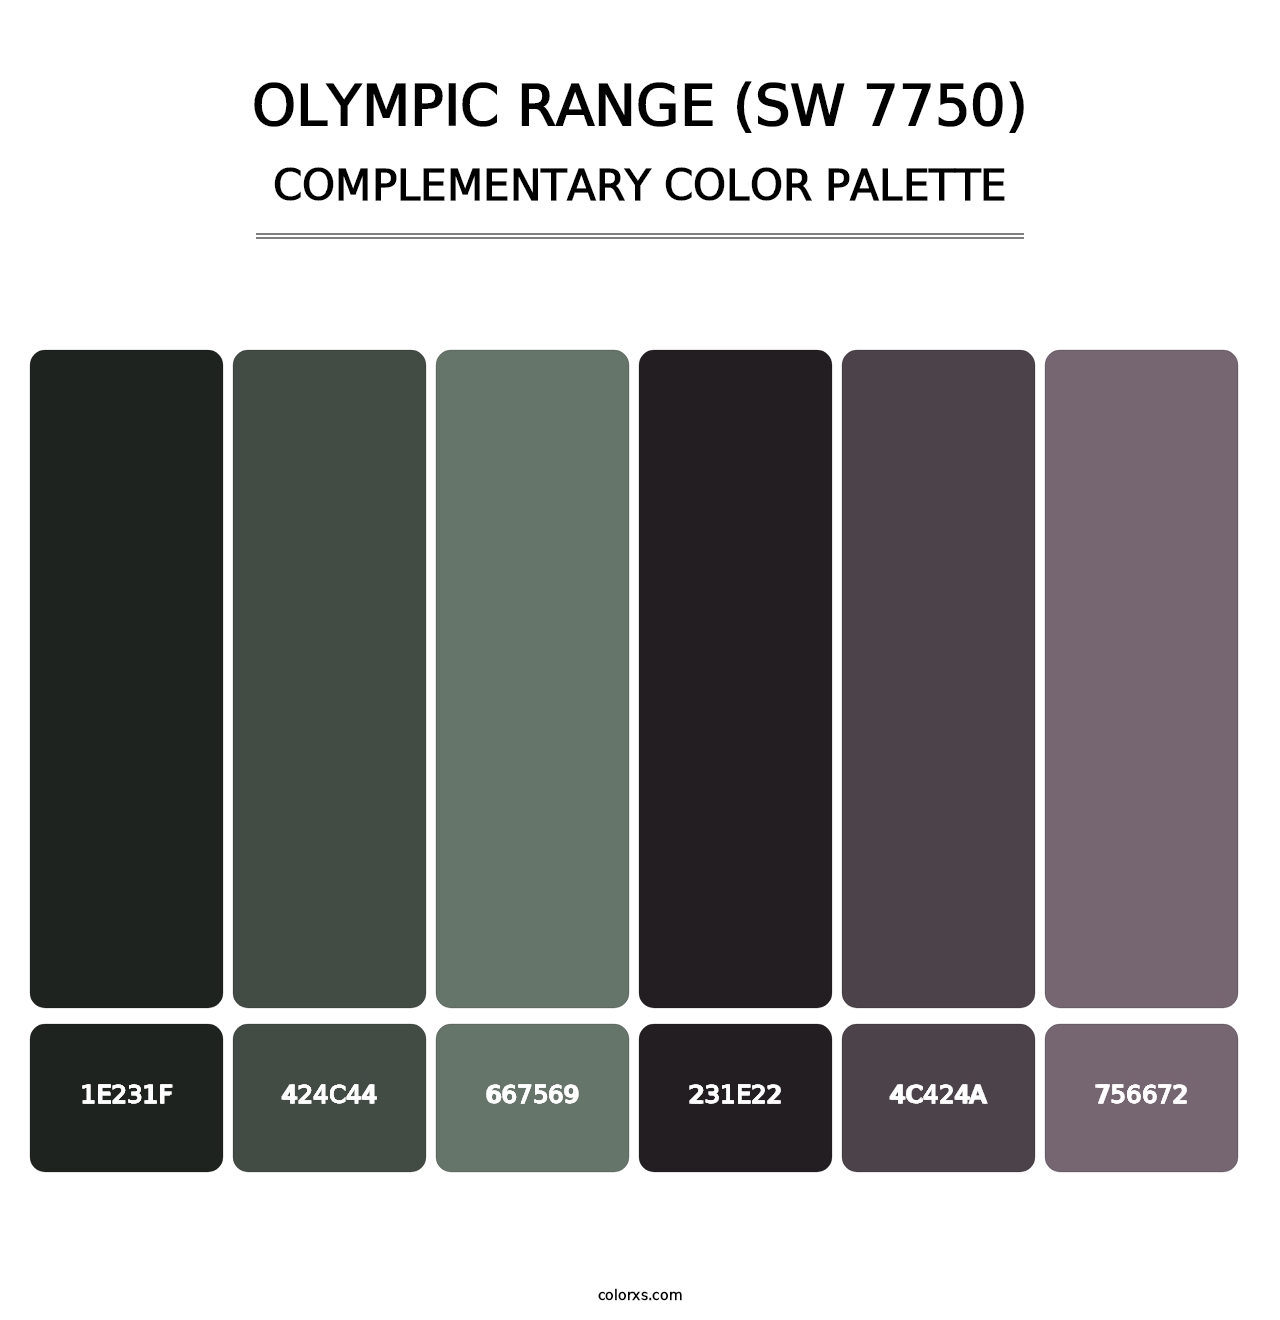 Olympic Range (SW 7750) - Complementary Color Palette